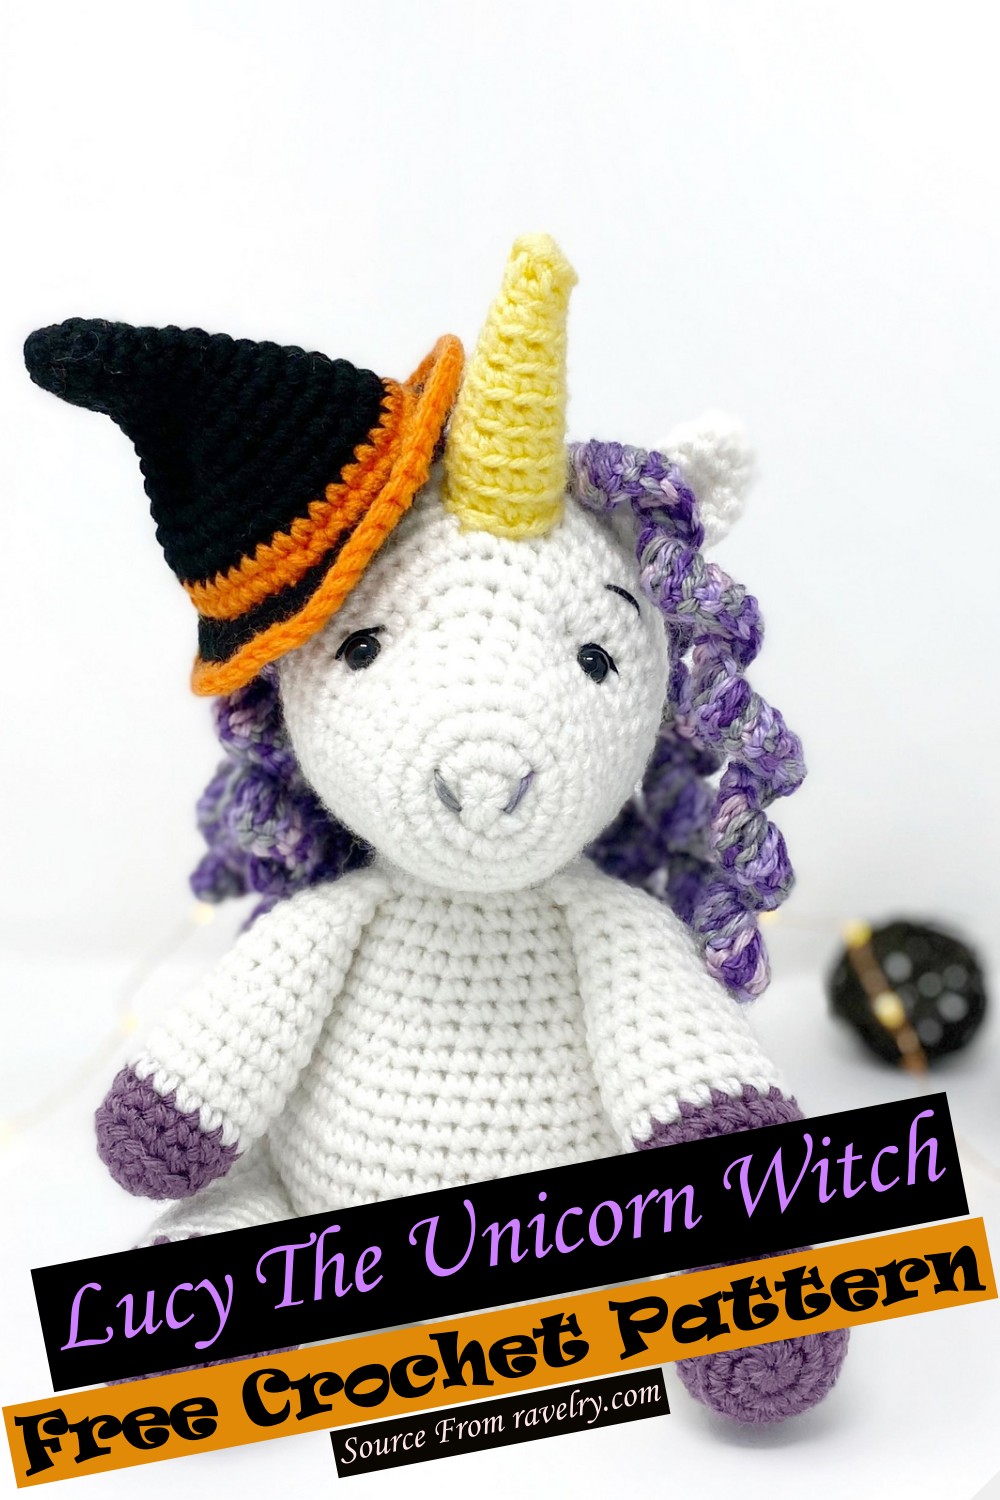 Crochet Lucy The Unicorn Witch Pattern